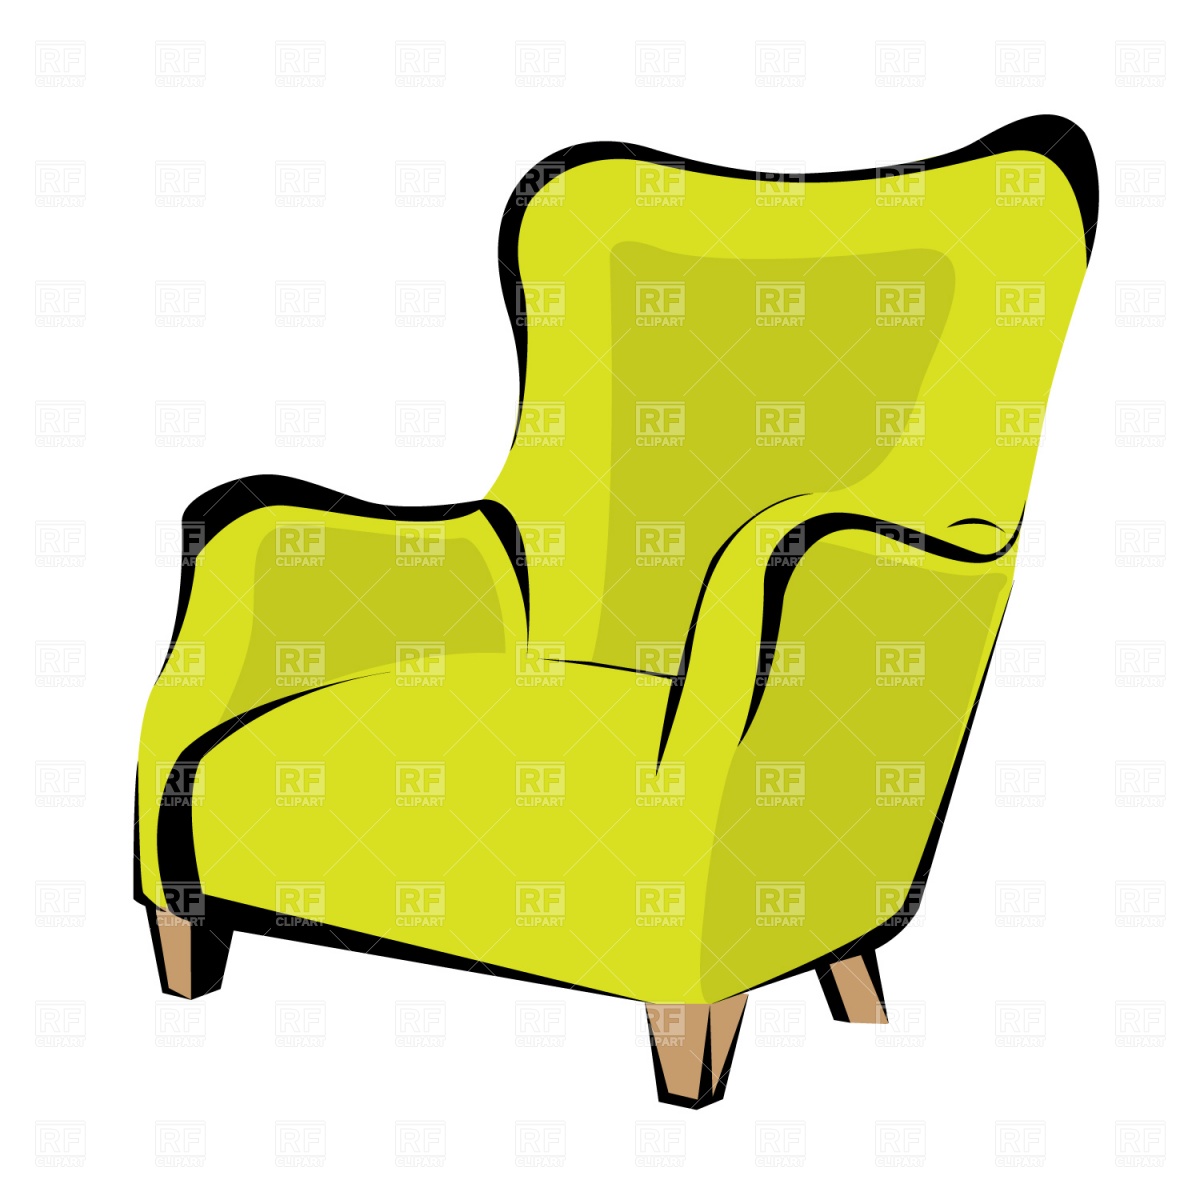 Retro Armchair Download Royalty Free Vector Clipart  Eps 